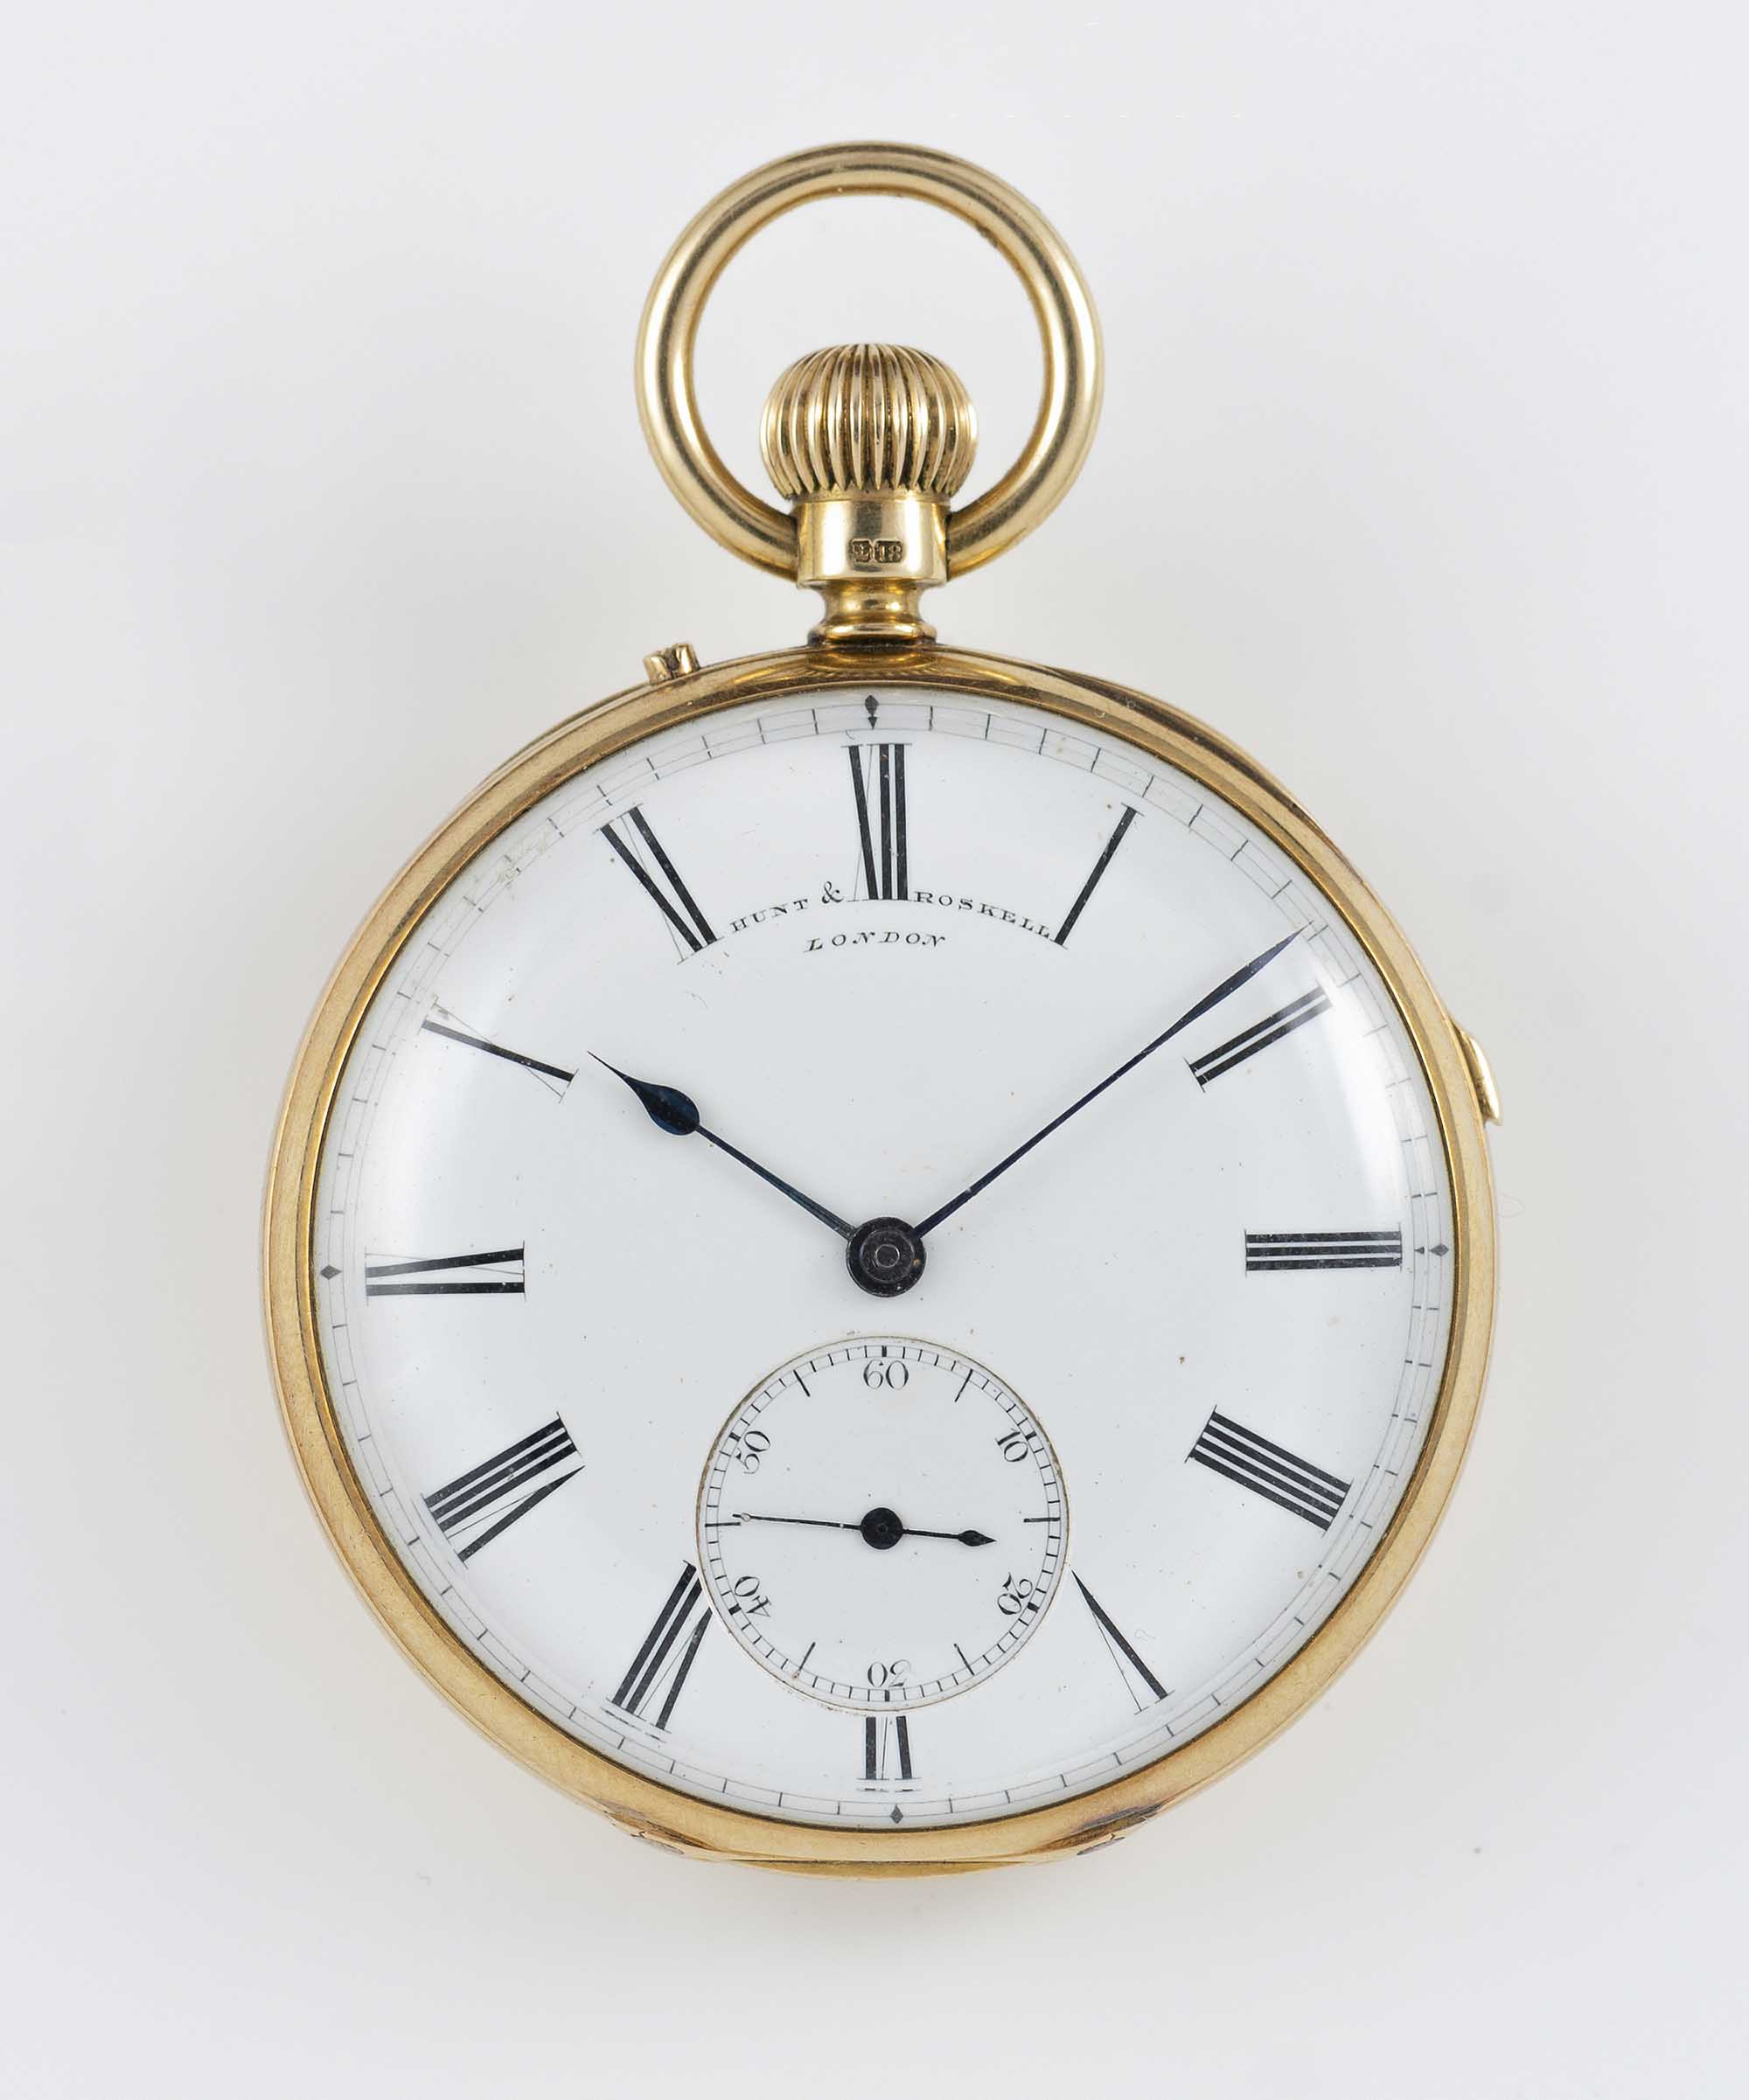 A FINE GENTLEMAN'S 18K SOLID GOLD OPEN FACE QUARTER REPEATER POCKET WATCH CIRCA 1870s SIGNED